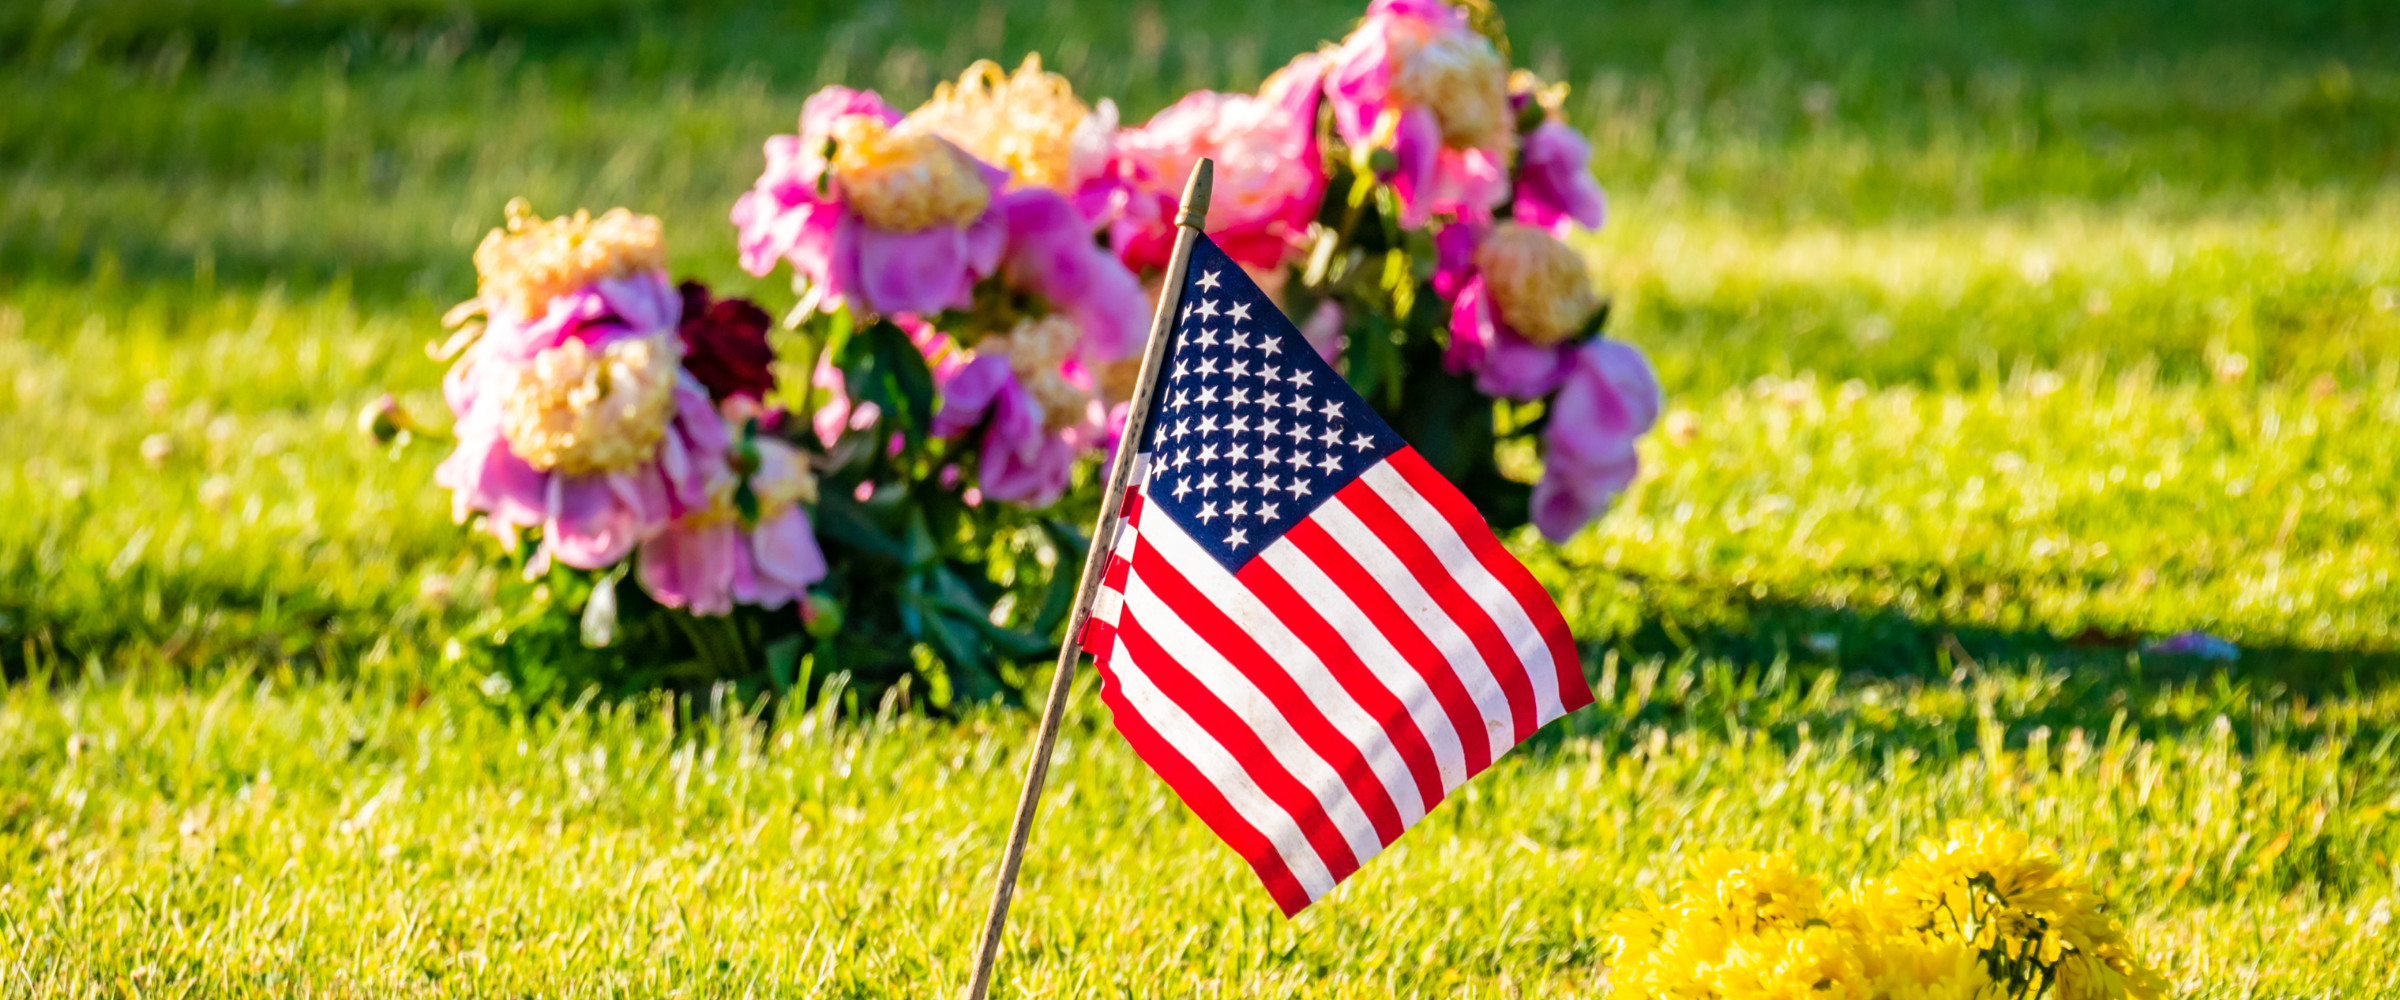 Memorial Day: A Time to Reflect, Remember, and Pay Tribute